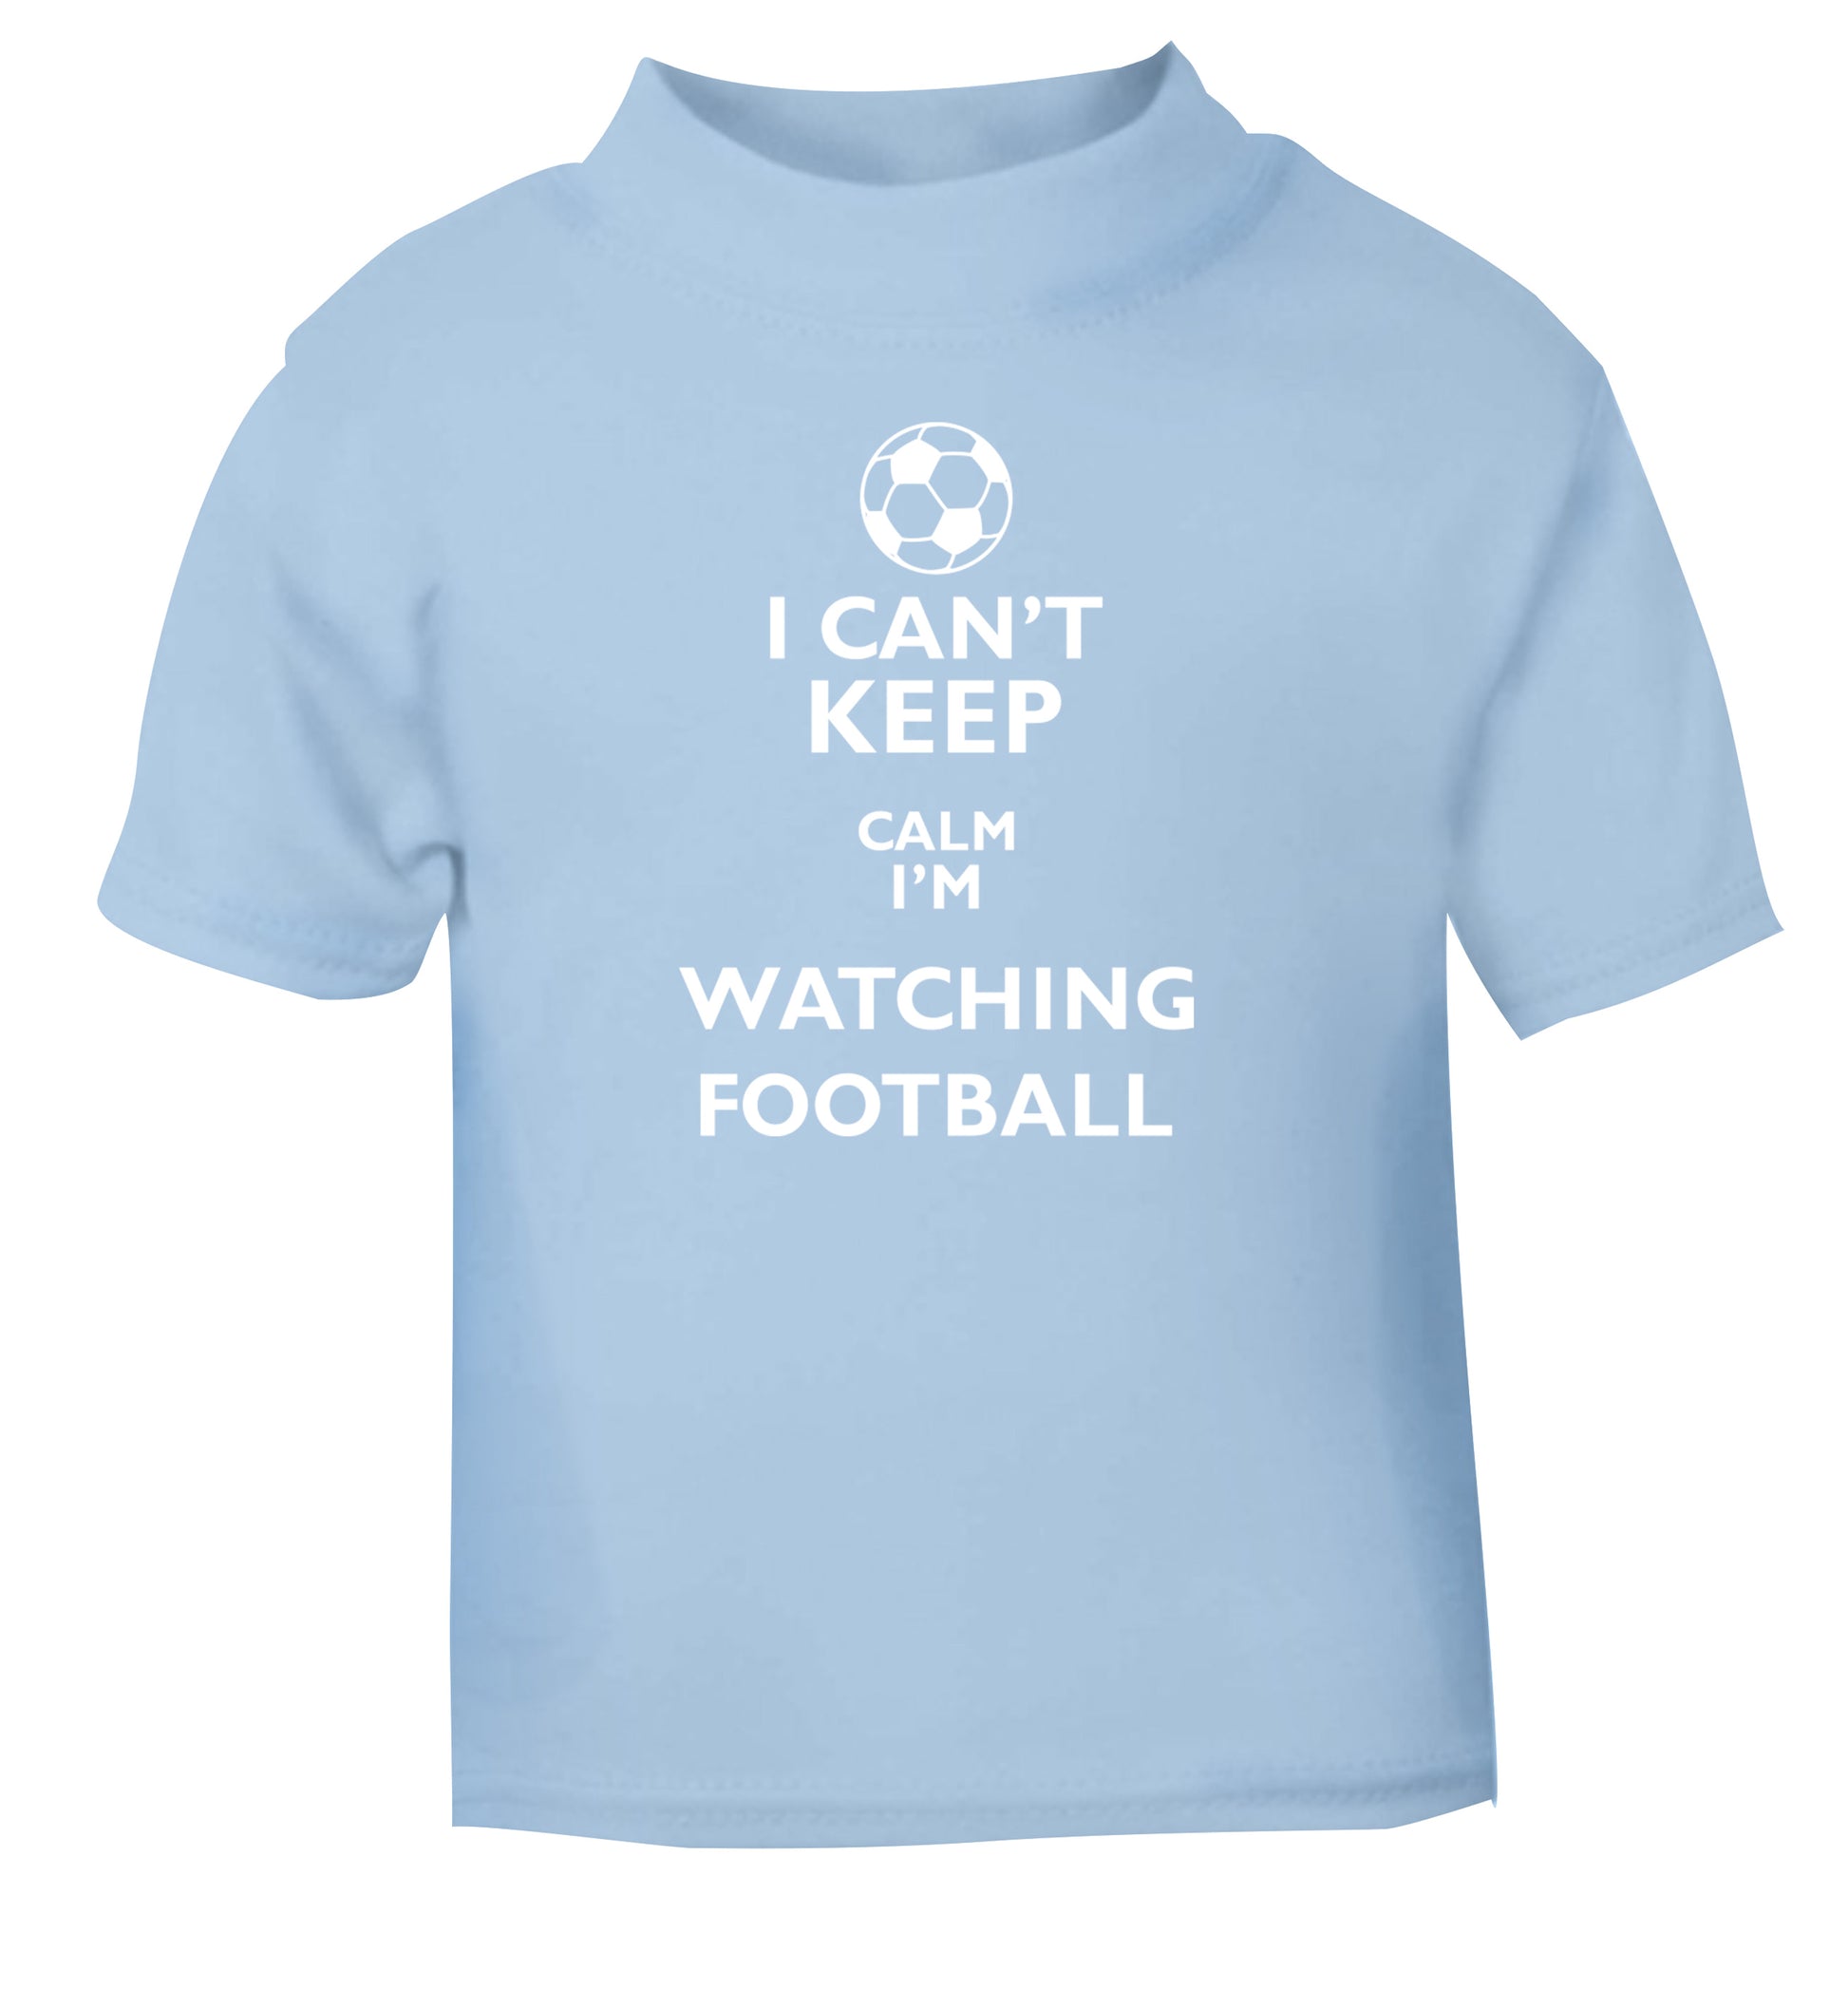 I can't keep calm I'm watching the football light blue Baby Toddler Tshirt 2 Years